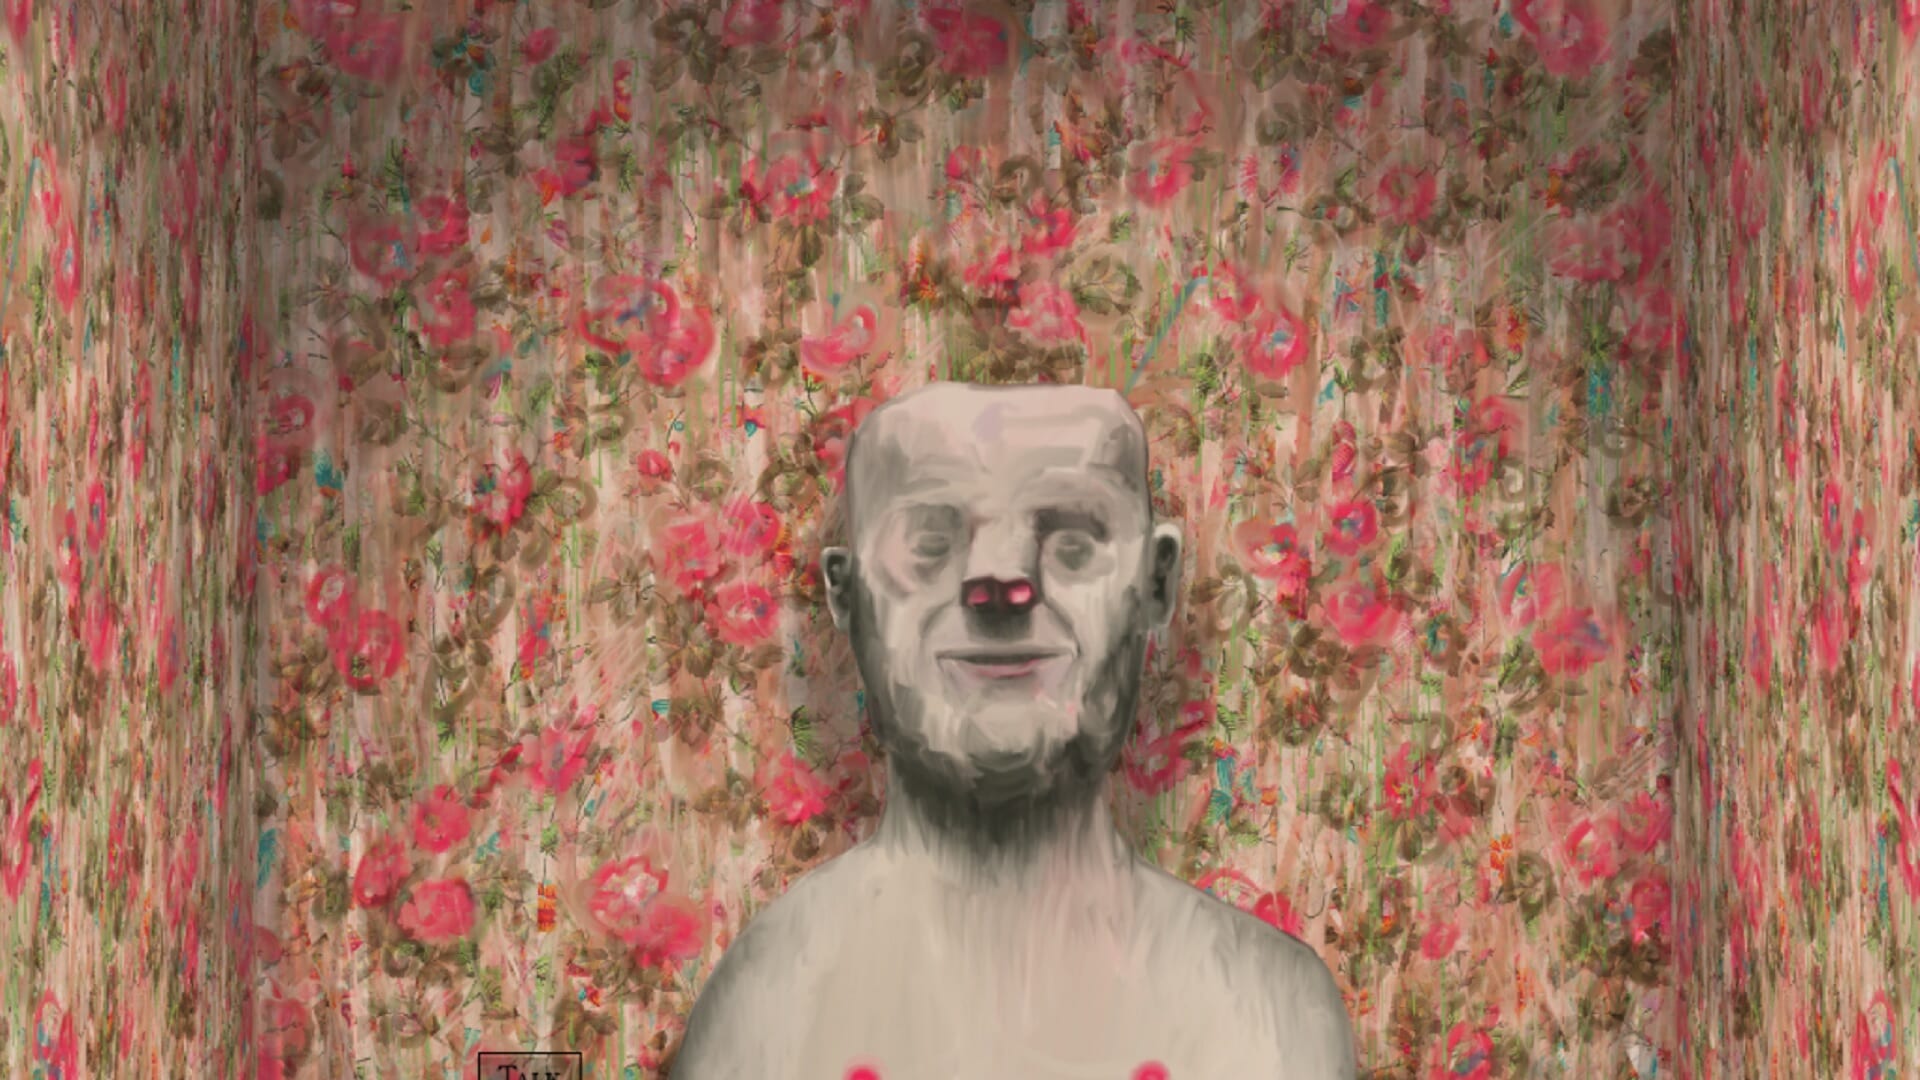 Springtime in the Flower Chamber - a pale, shirtless man stands in front of faded flower wallpaper